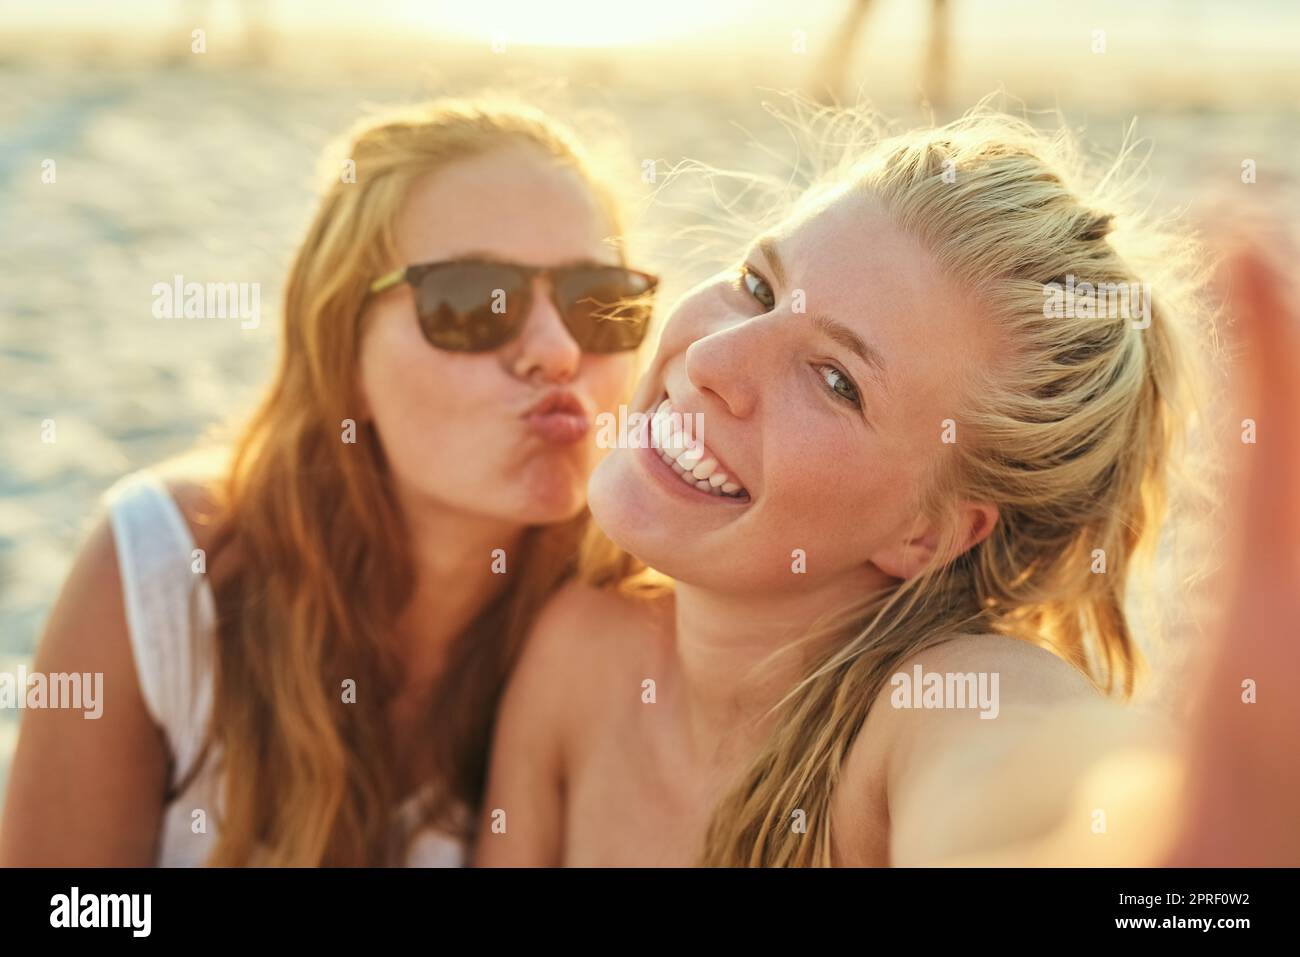 Soaking in the sun and the fun. young female best friends hanging out at the beach. Stock Photo